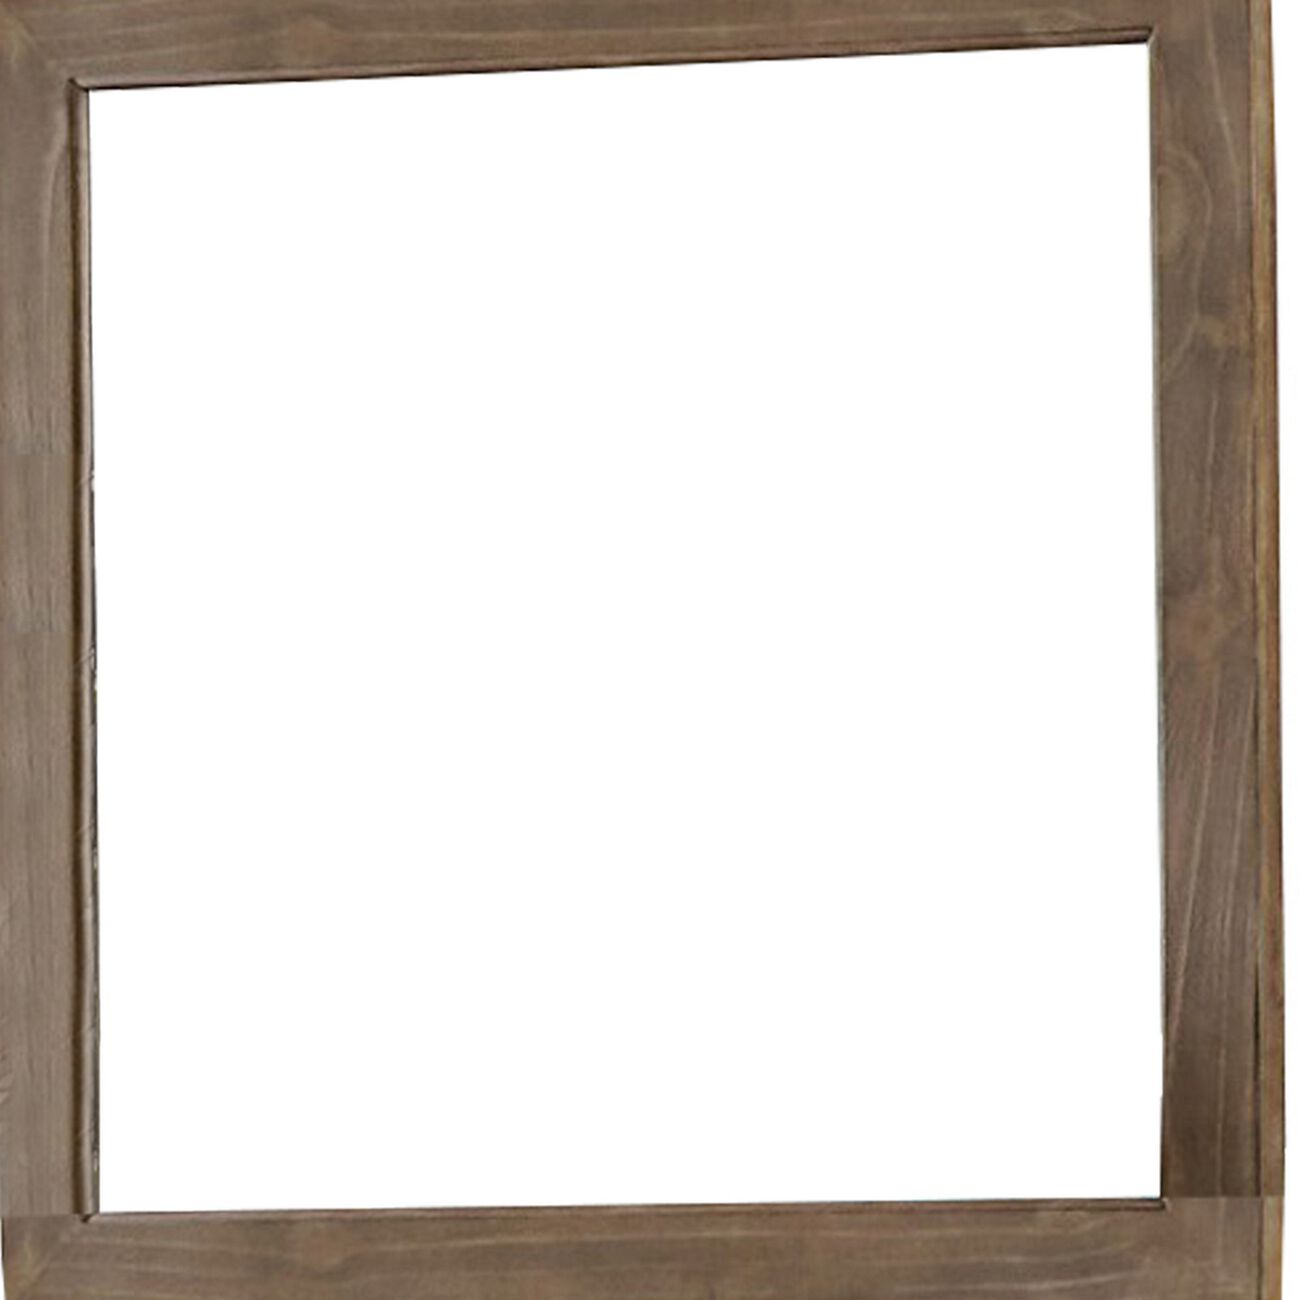 Contemporary Style Wooden Frame Dresser Mirror, Rustic Brown